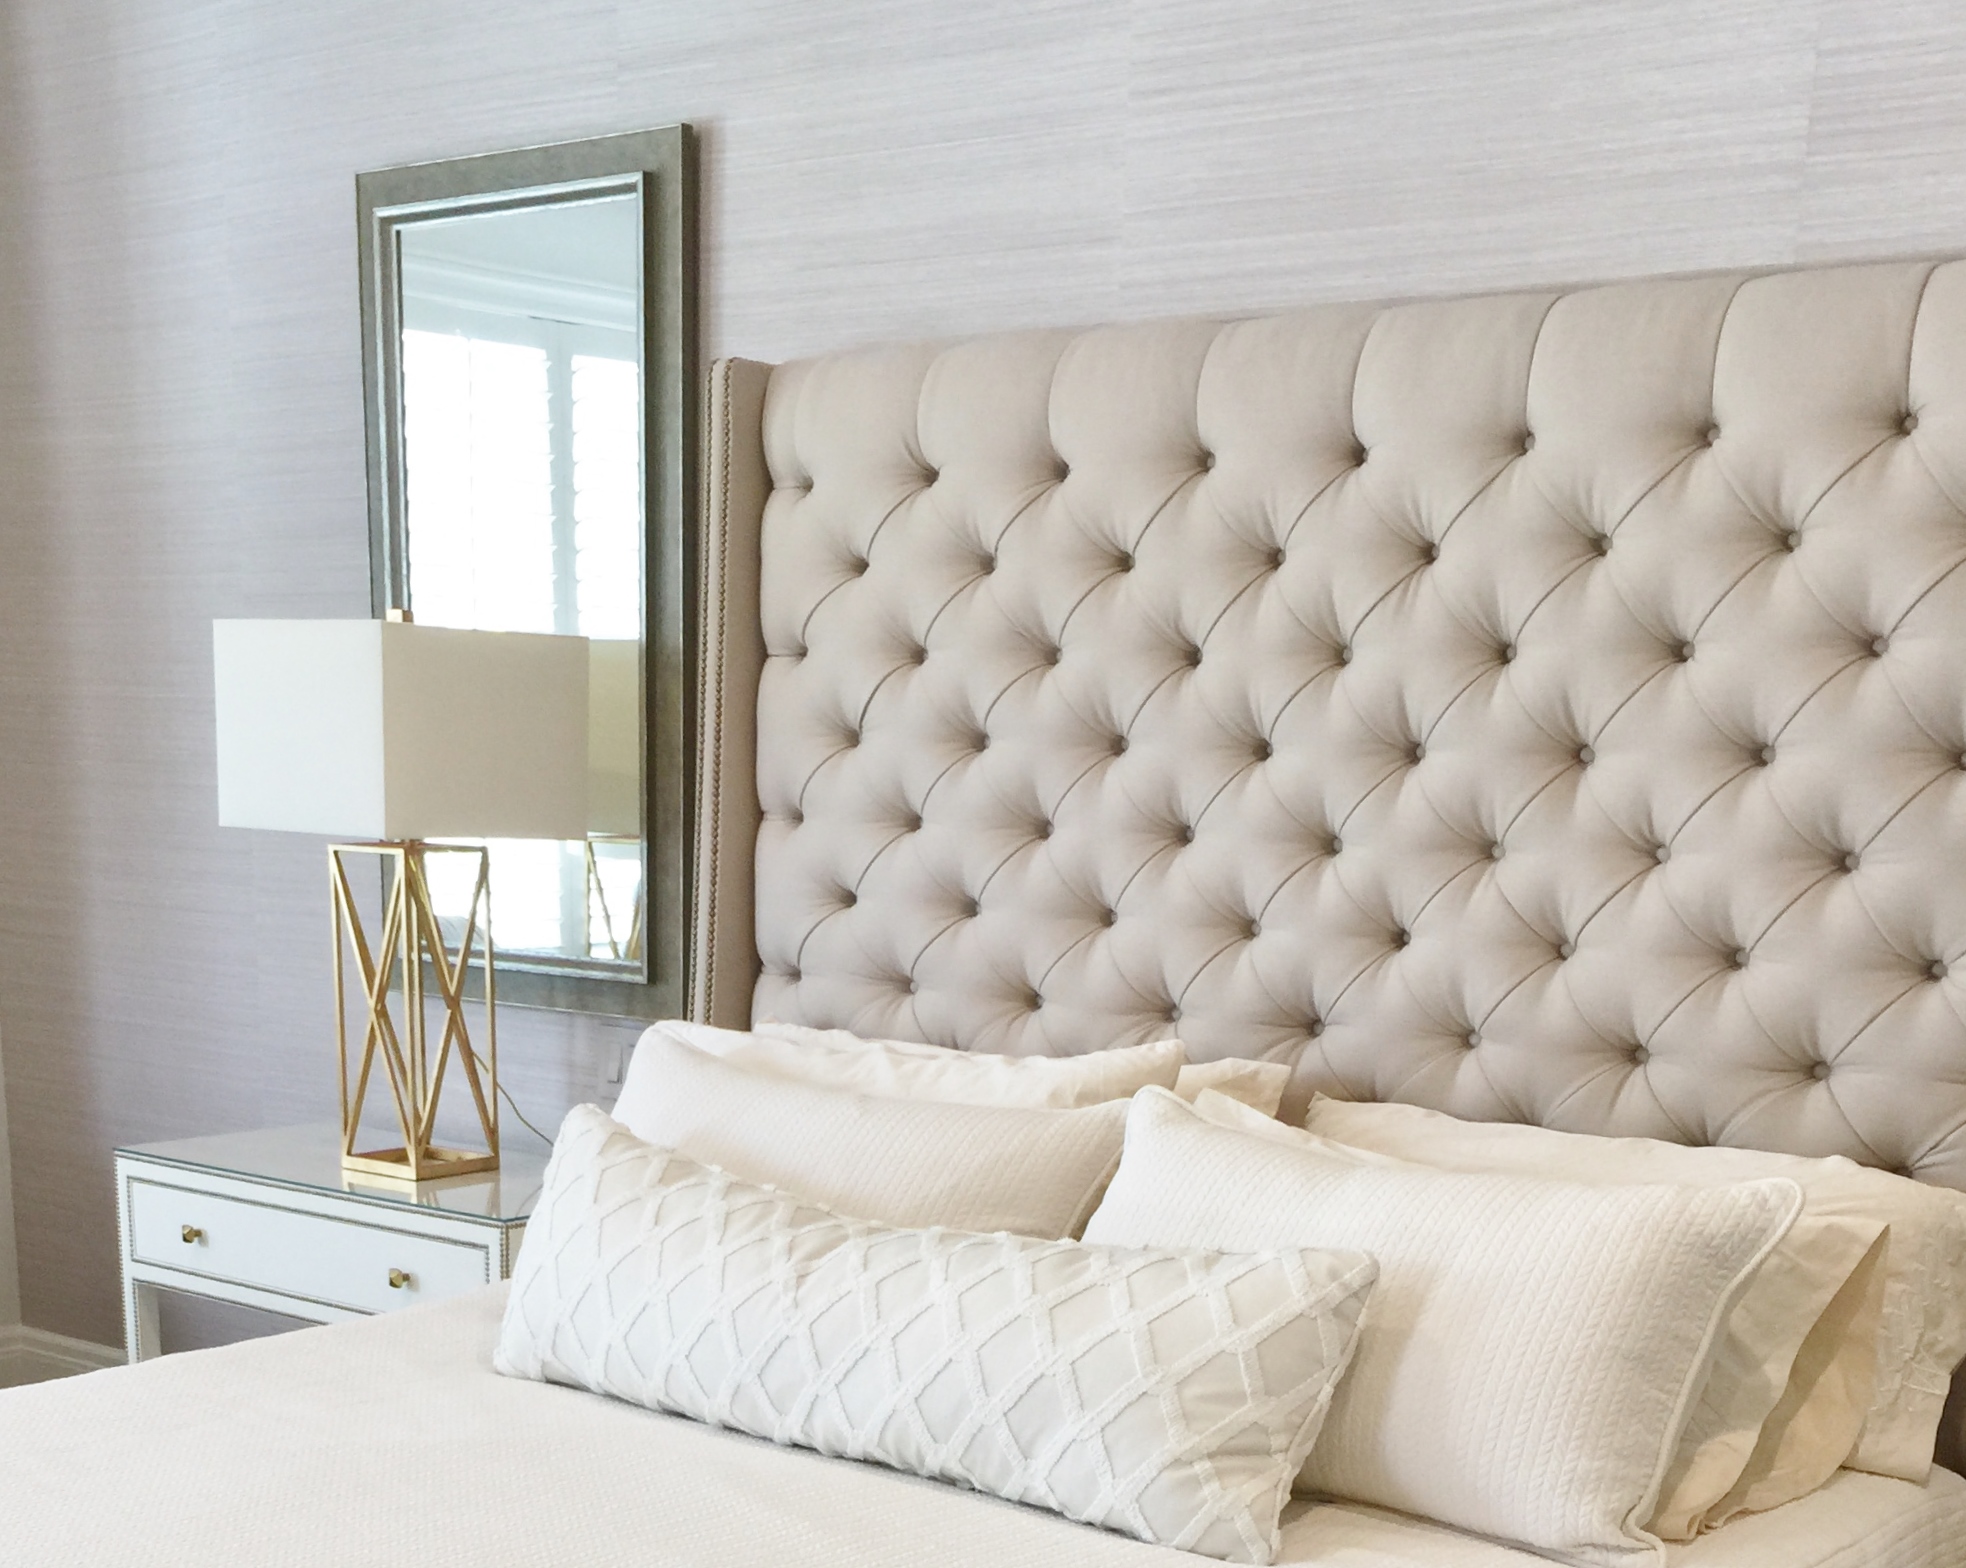 Change Out The Wood Headboard For A, Upholstered Wooden Headboard